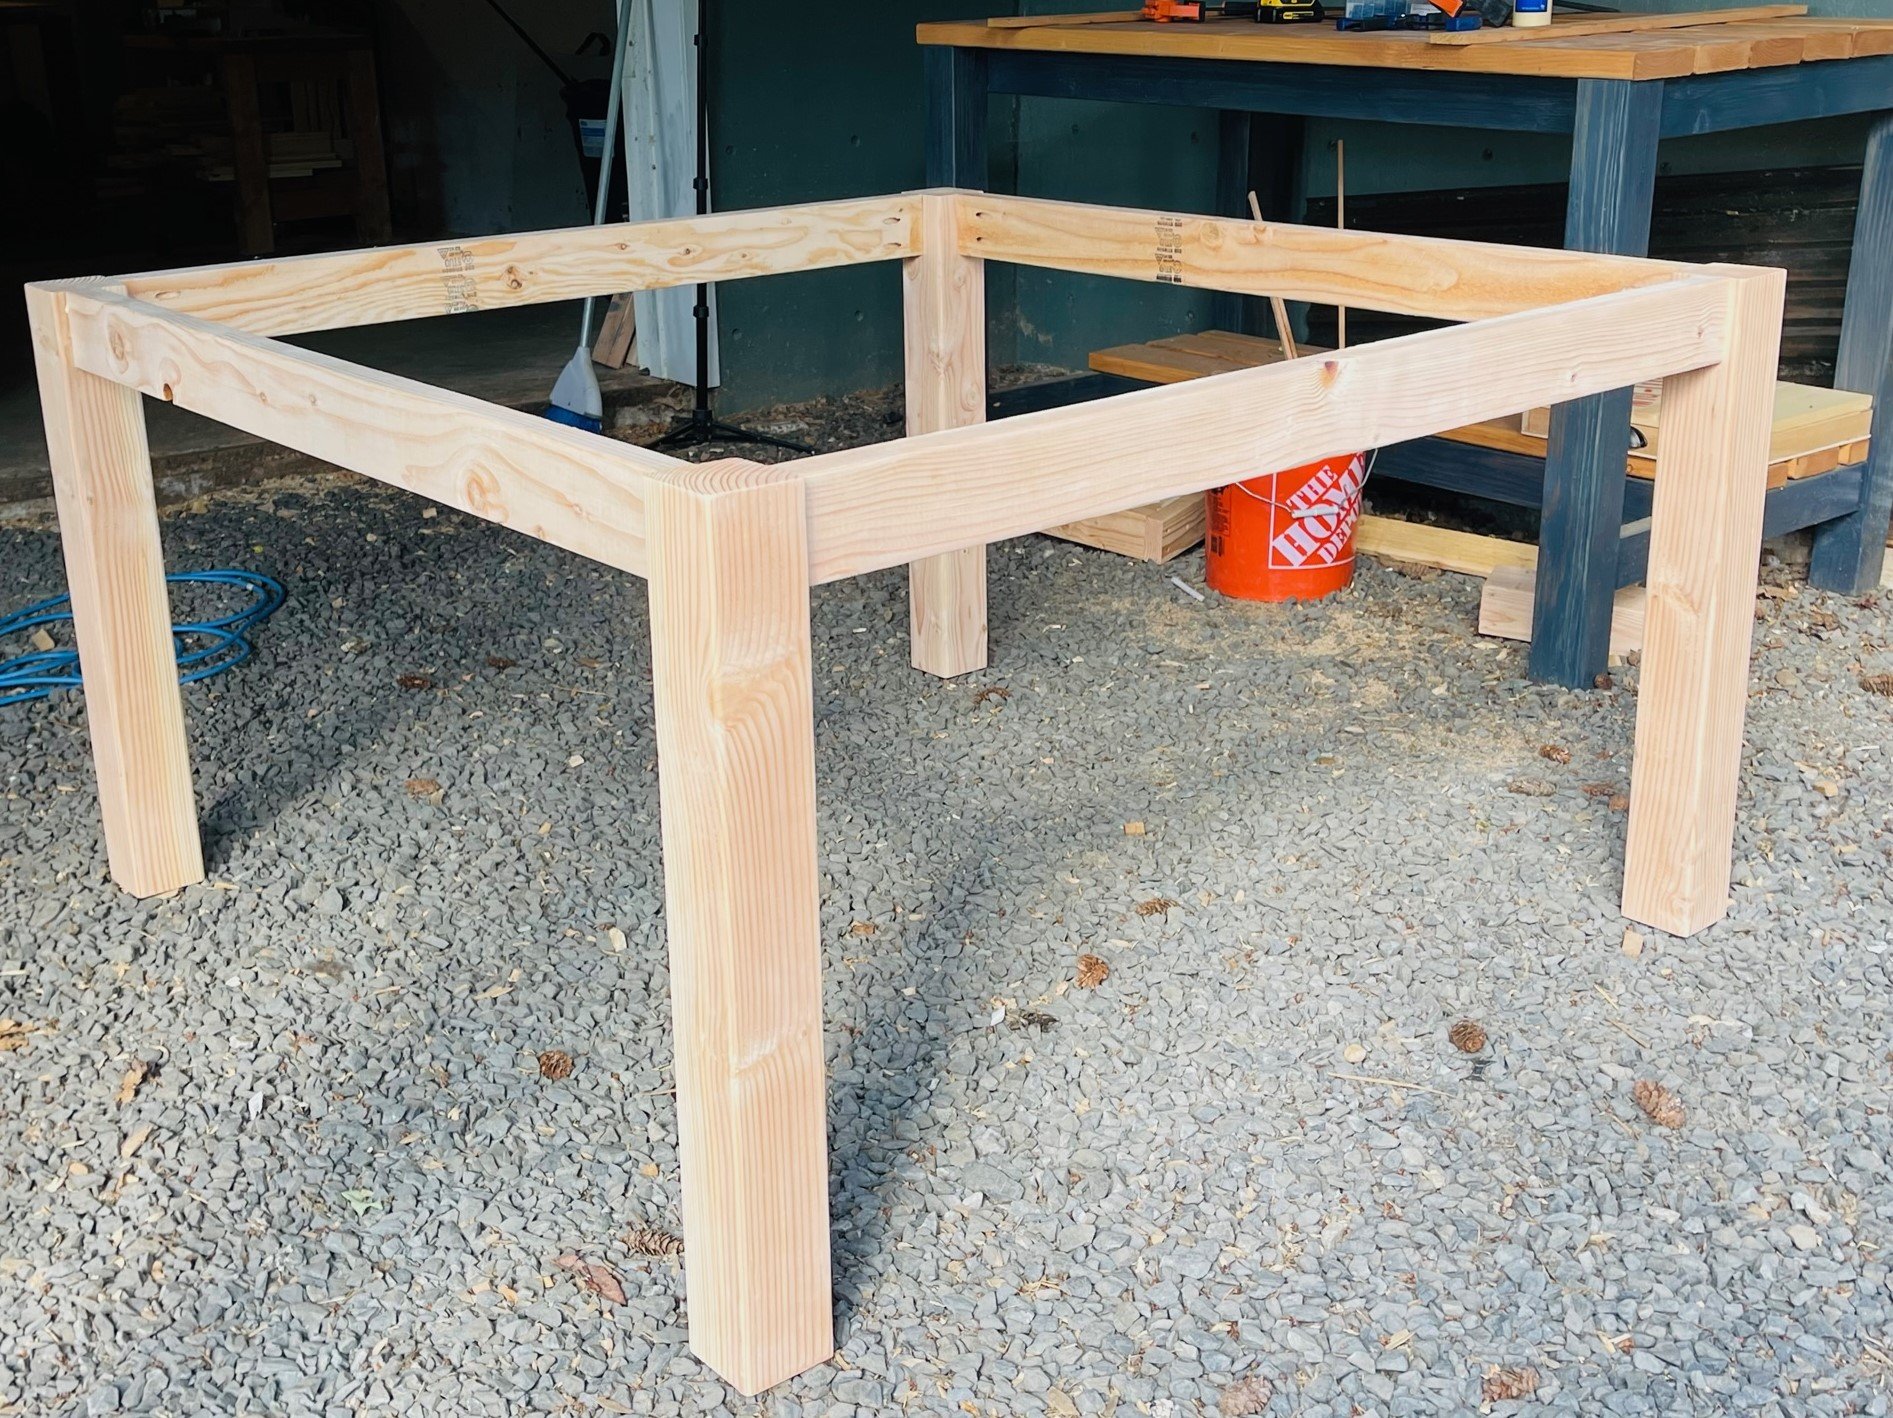 Completed table frame